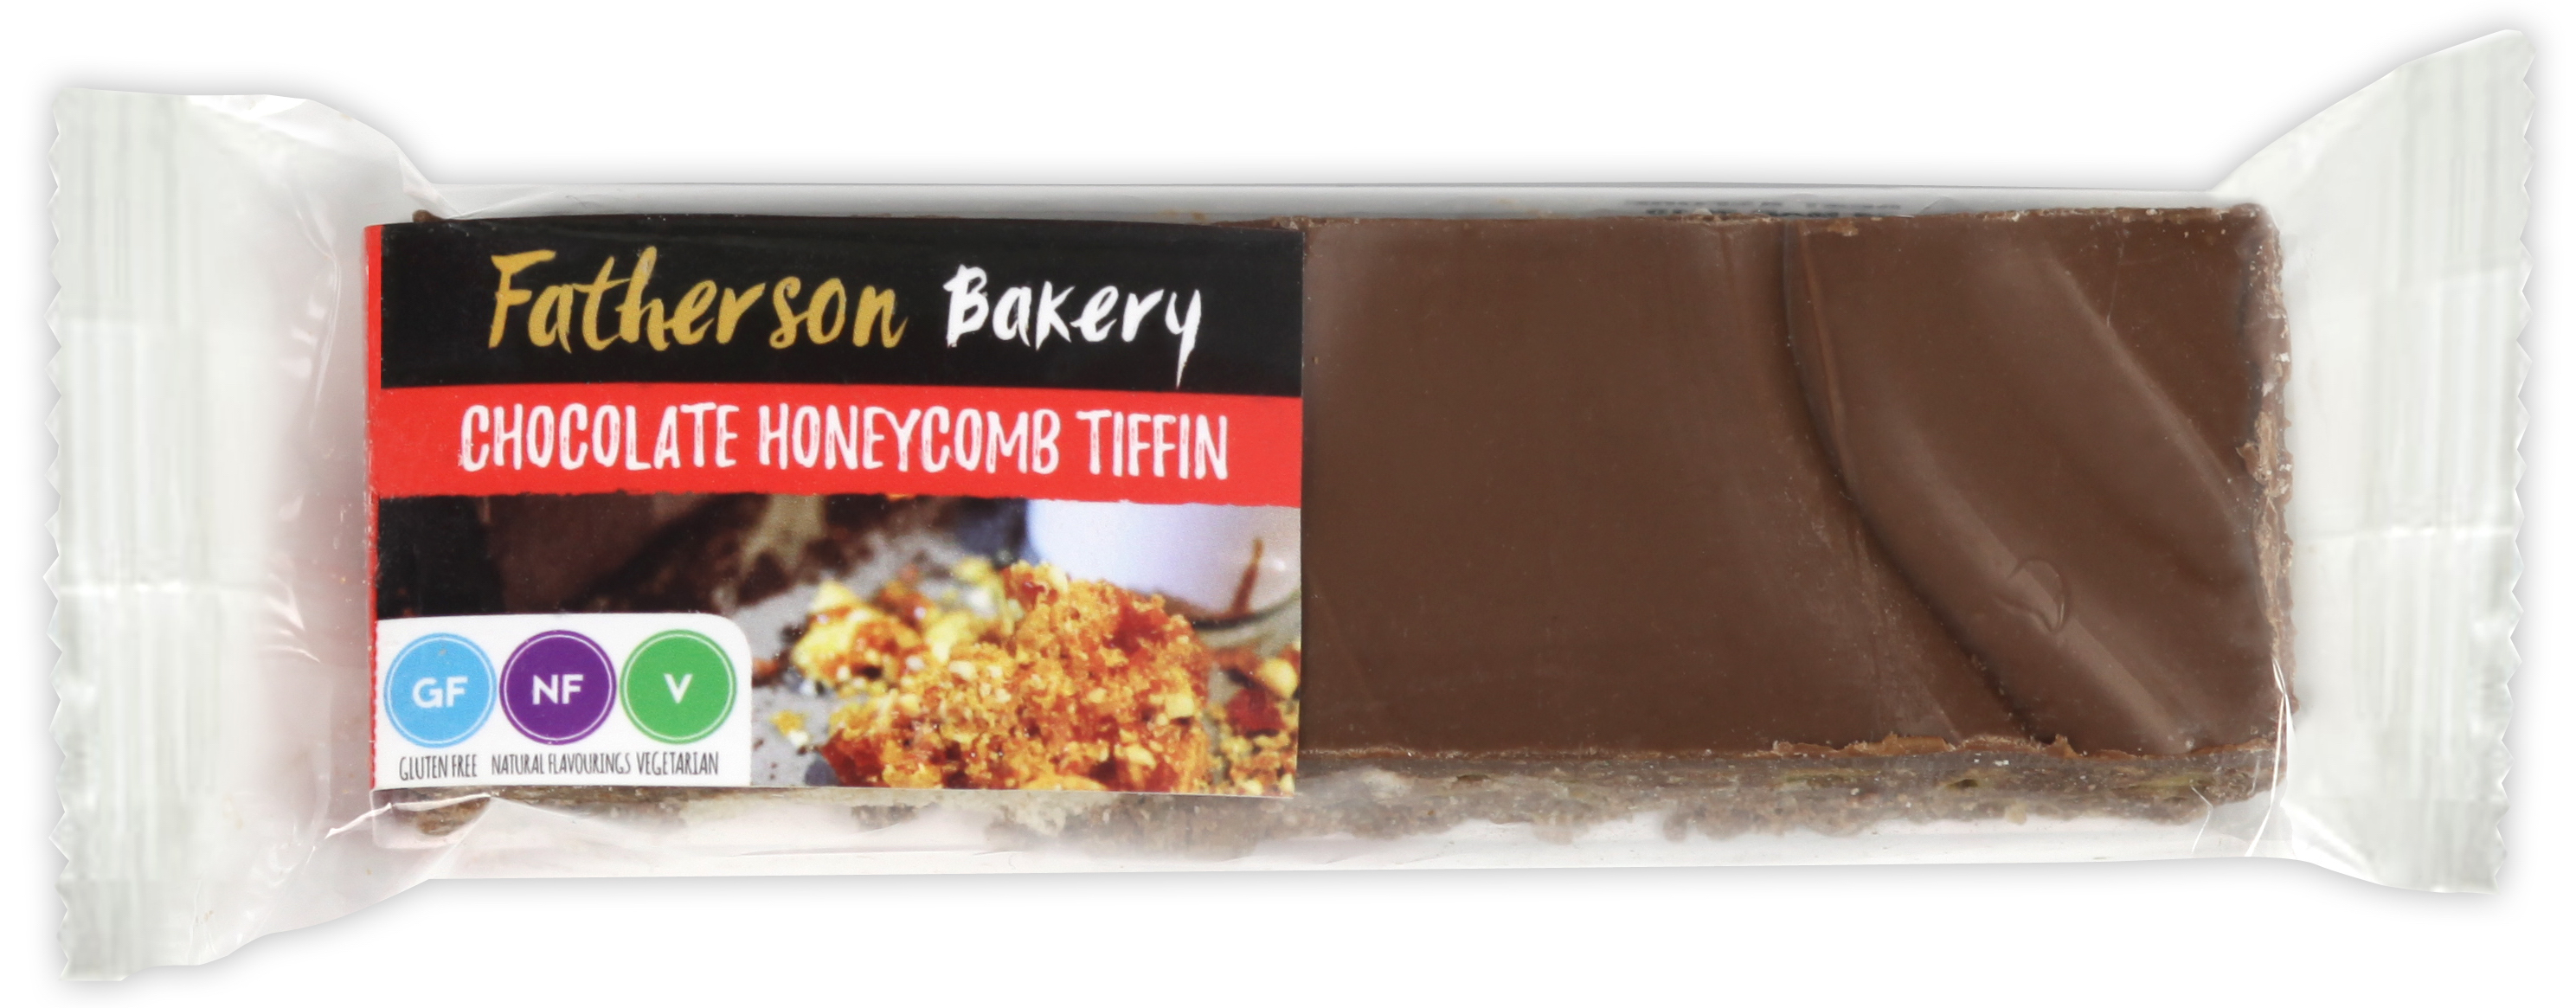 Fatherson Bakery launch new gluten-free snack bars